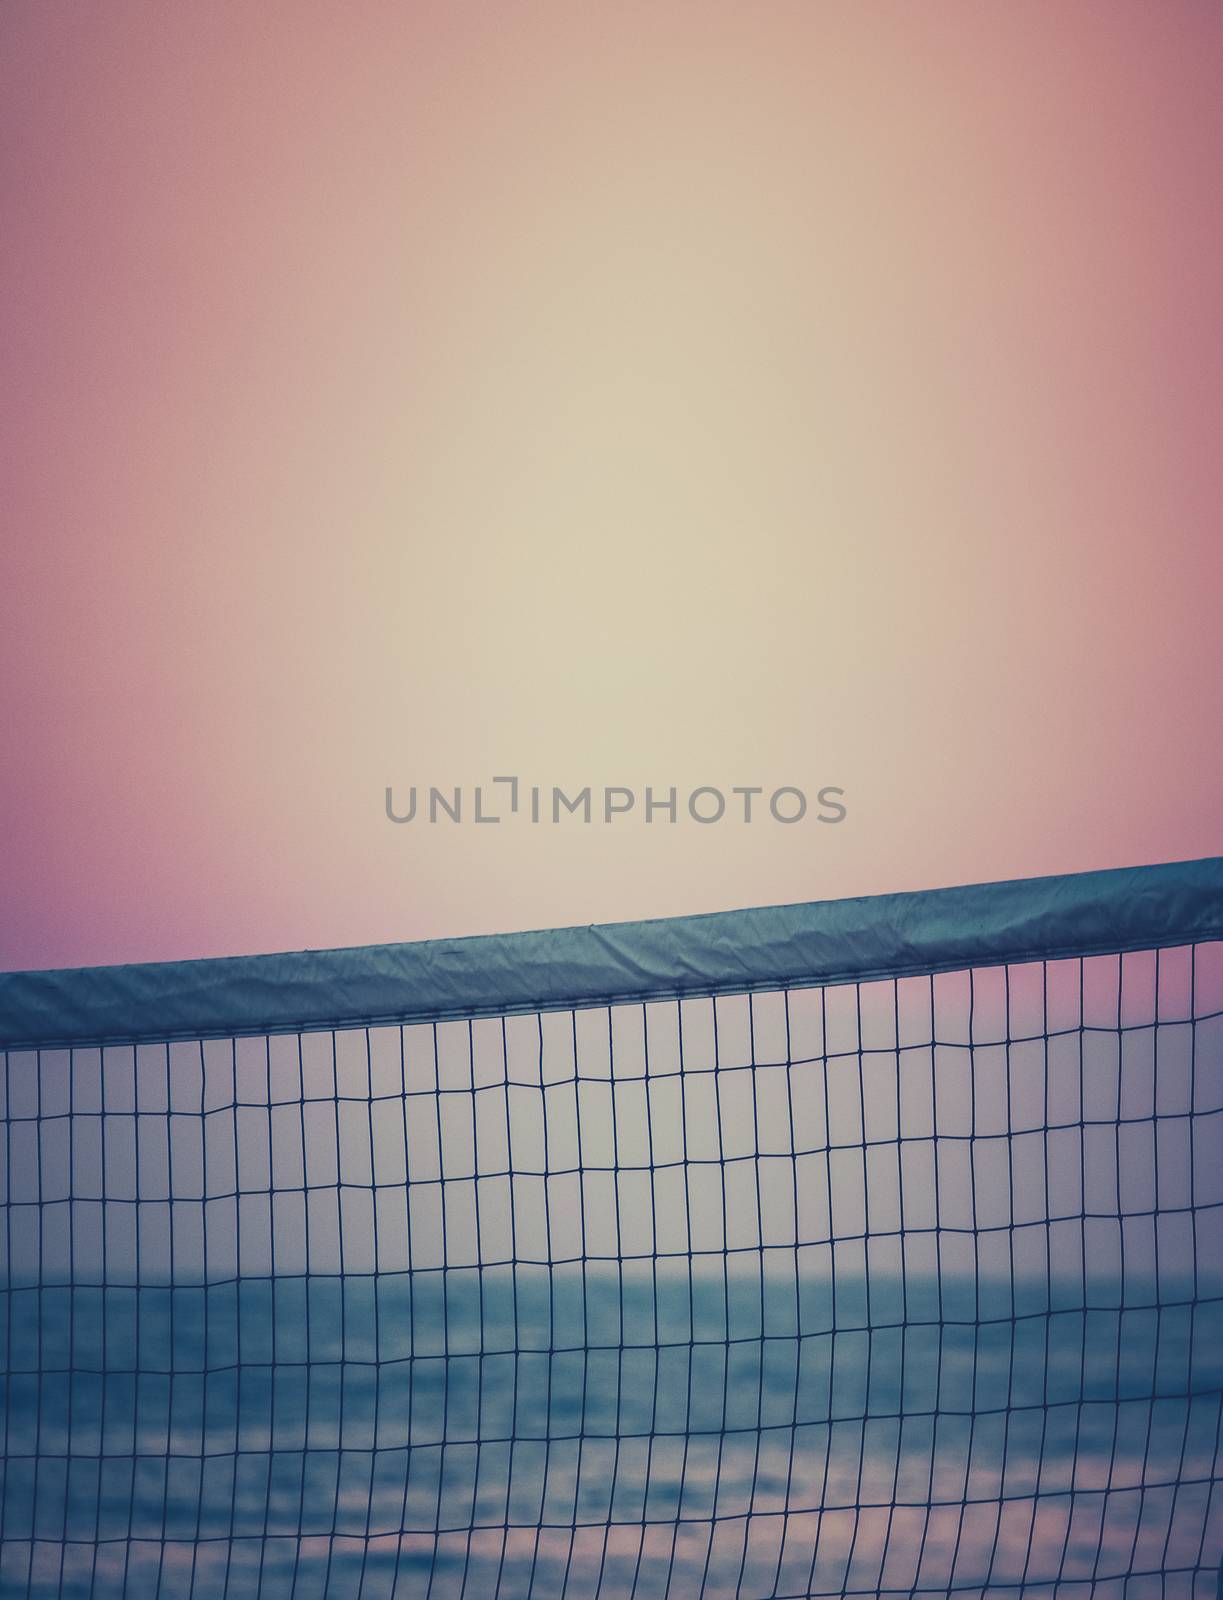 Retro Filtered Beach Volleyball Net At Sunset With Copy Space